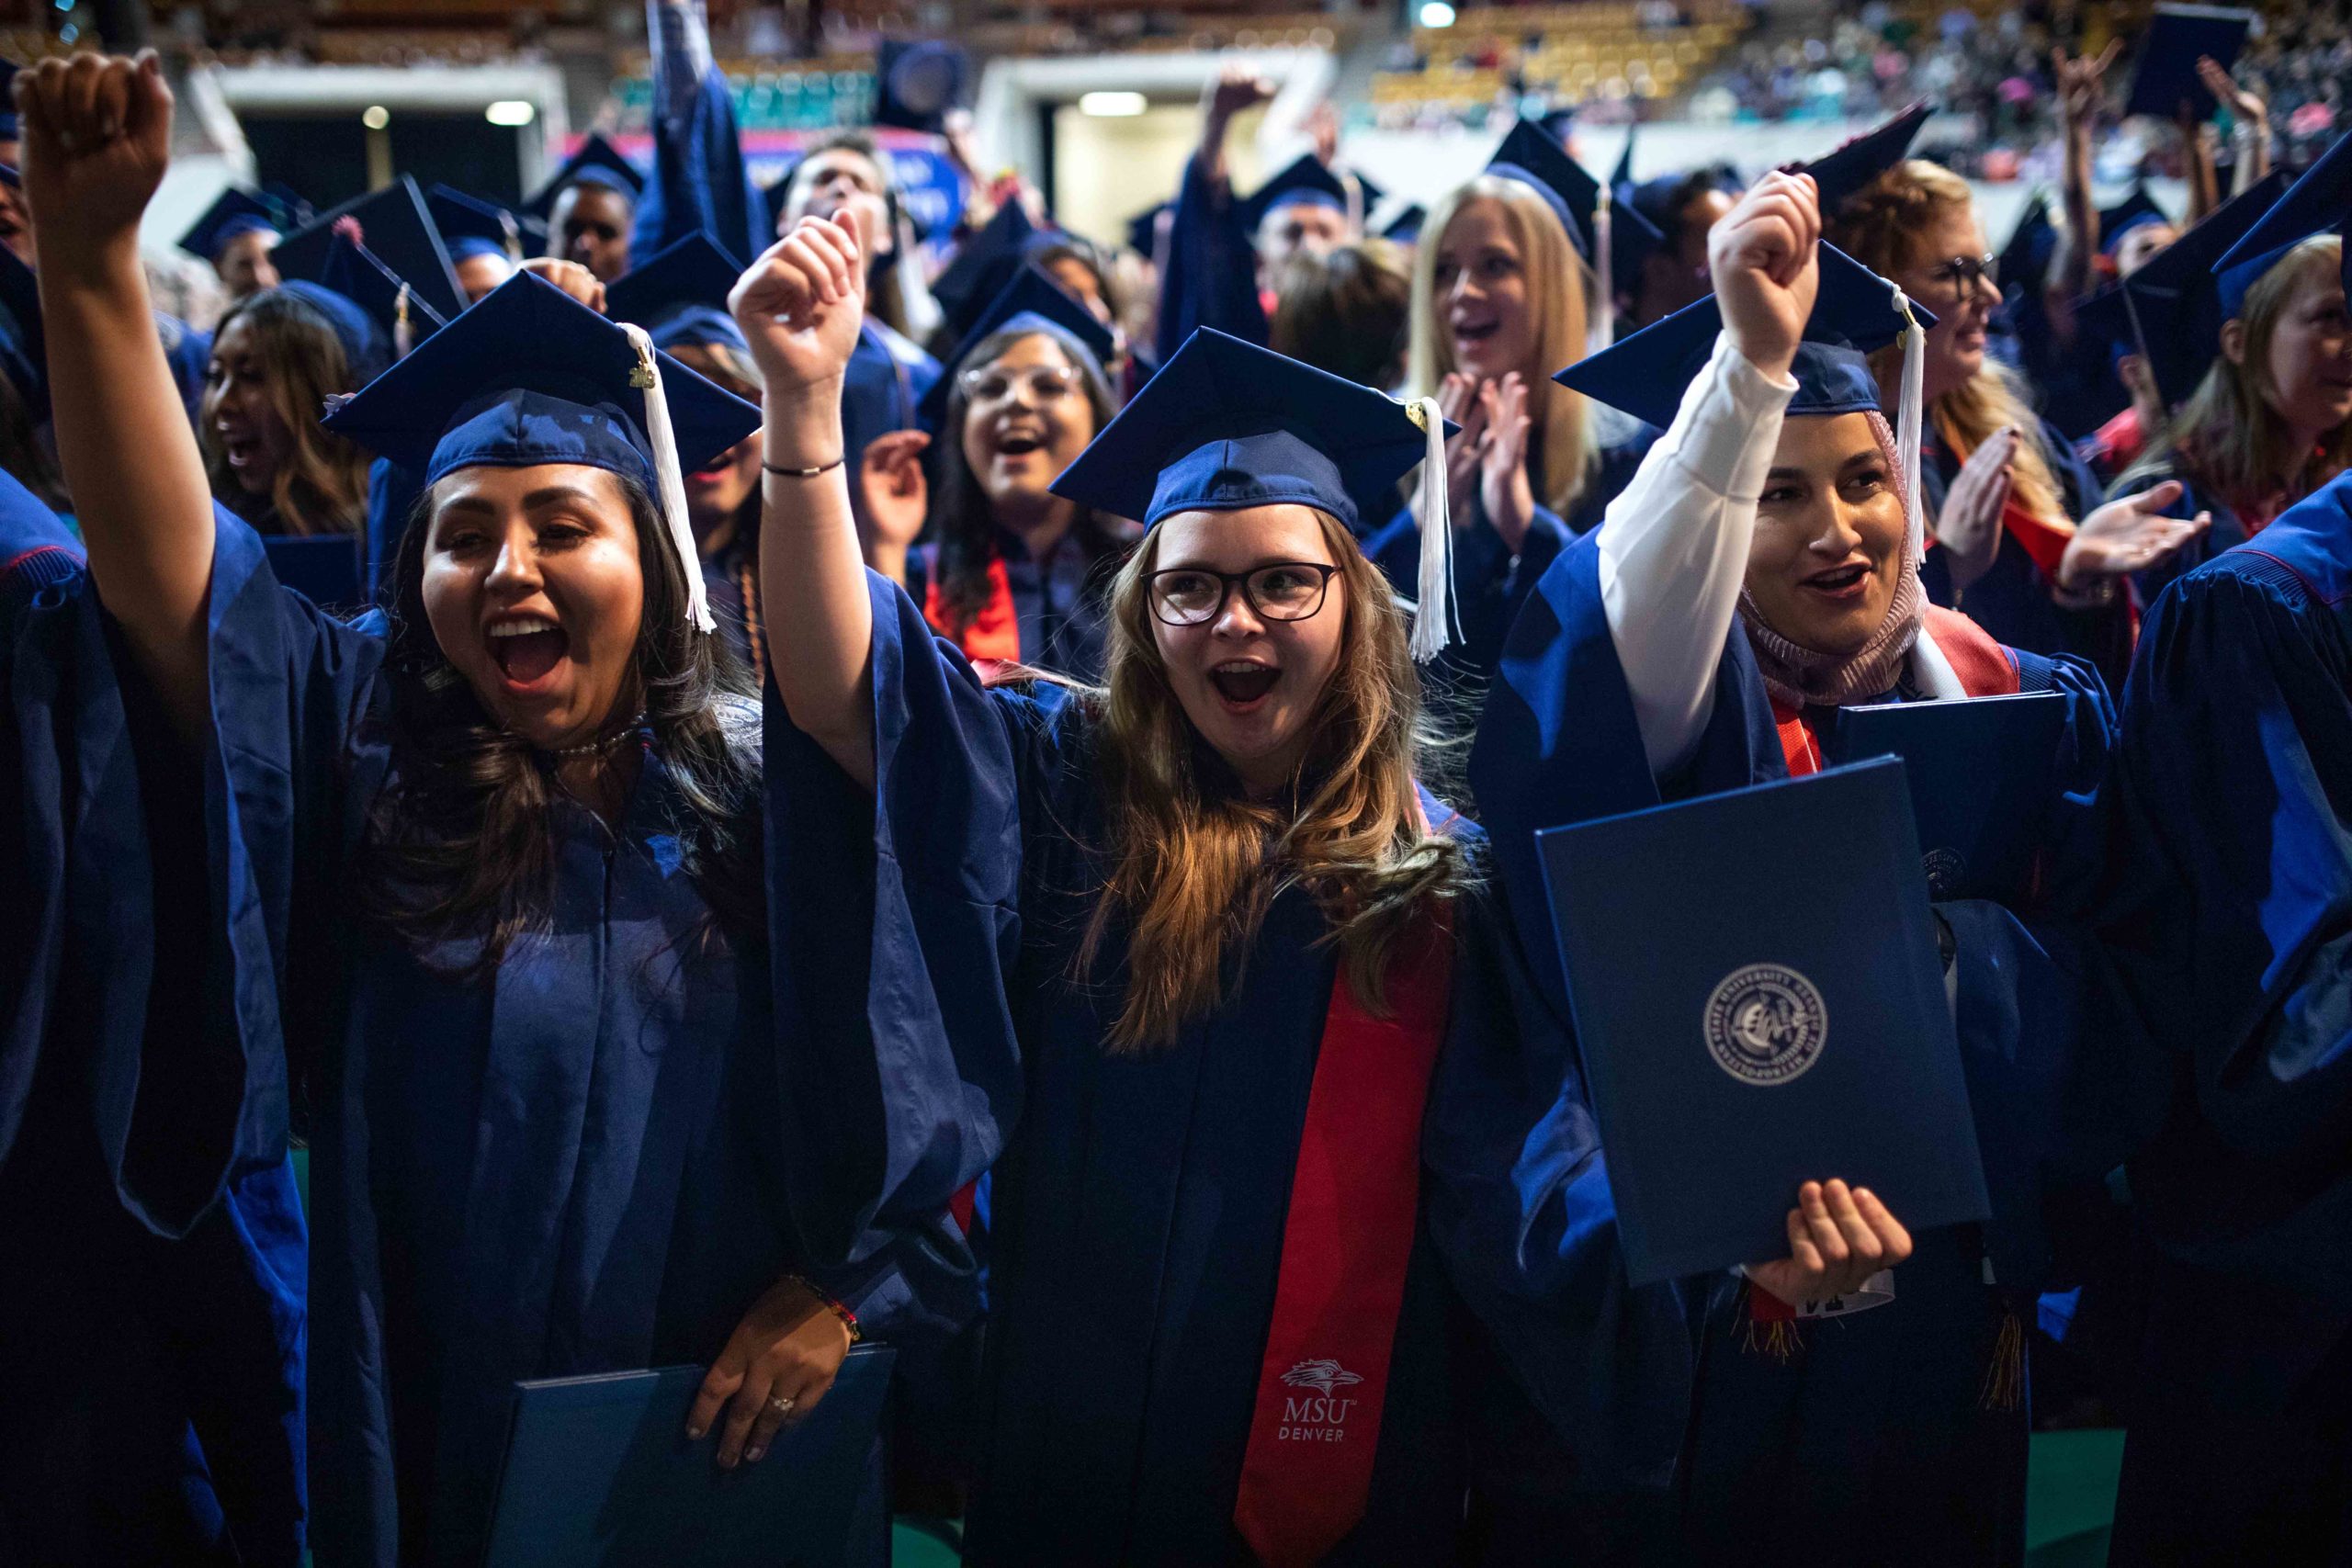 Graduates cheering during the commencement ceremony.